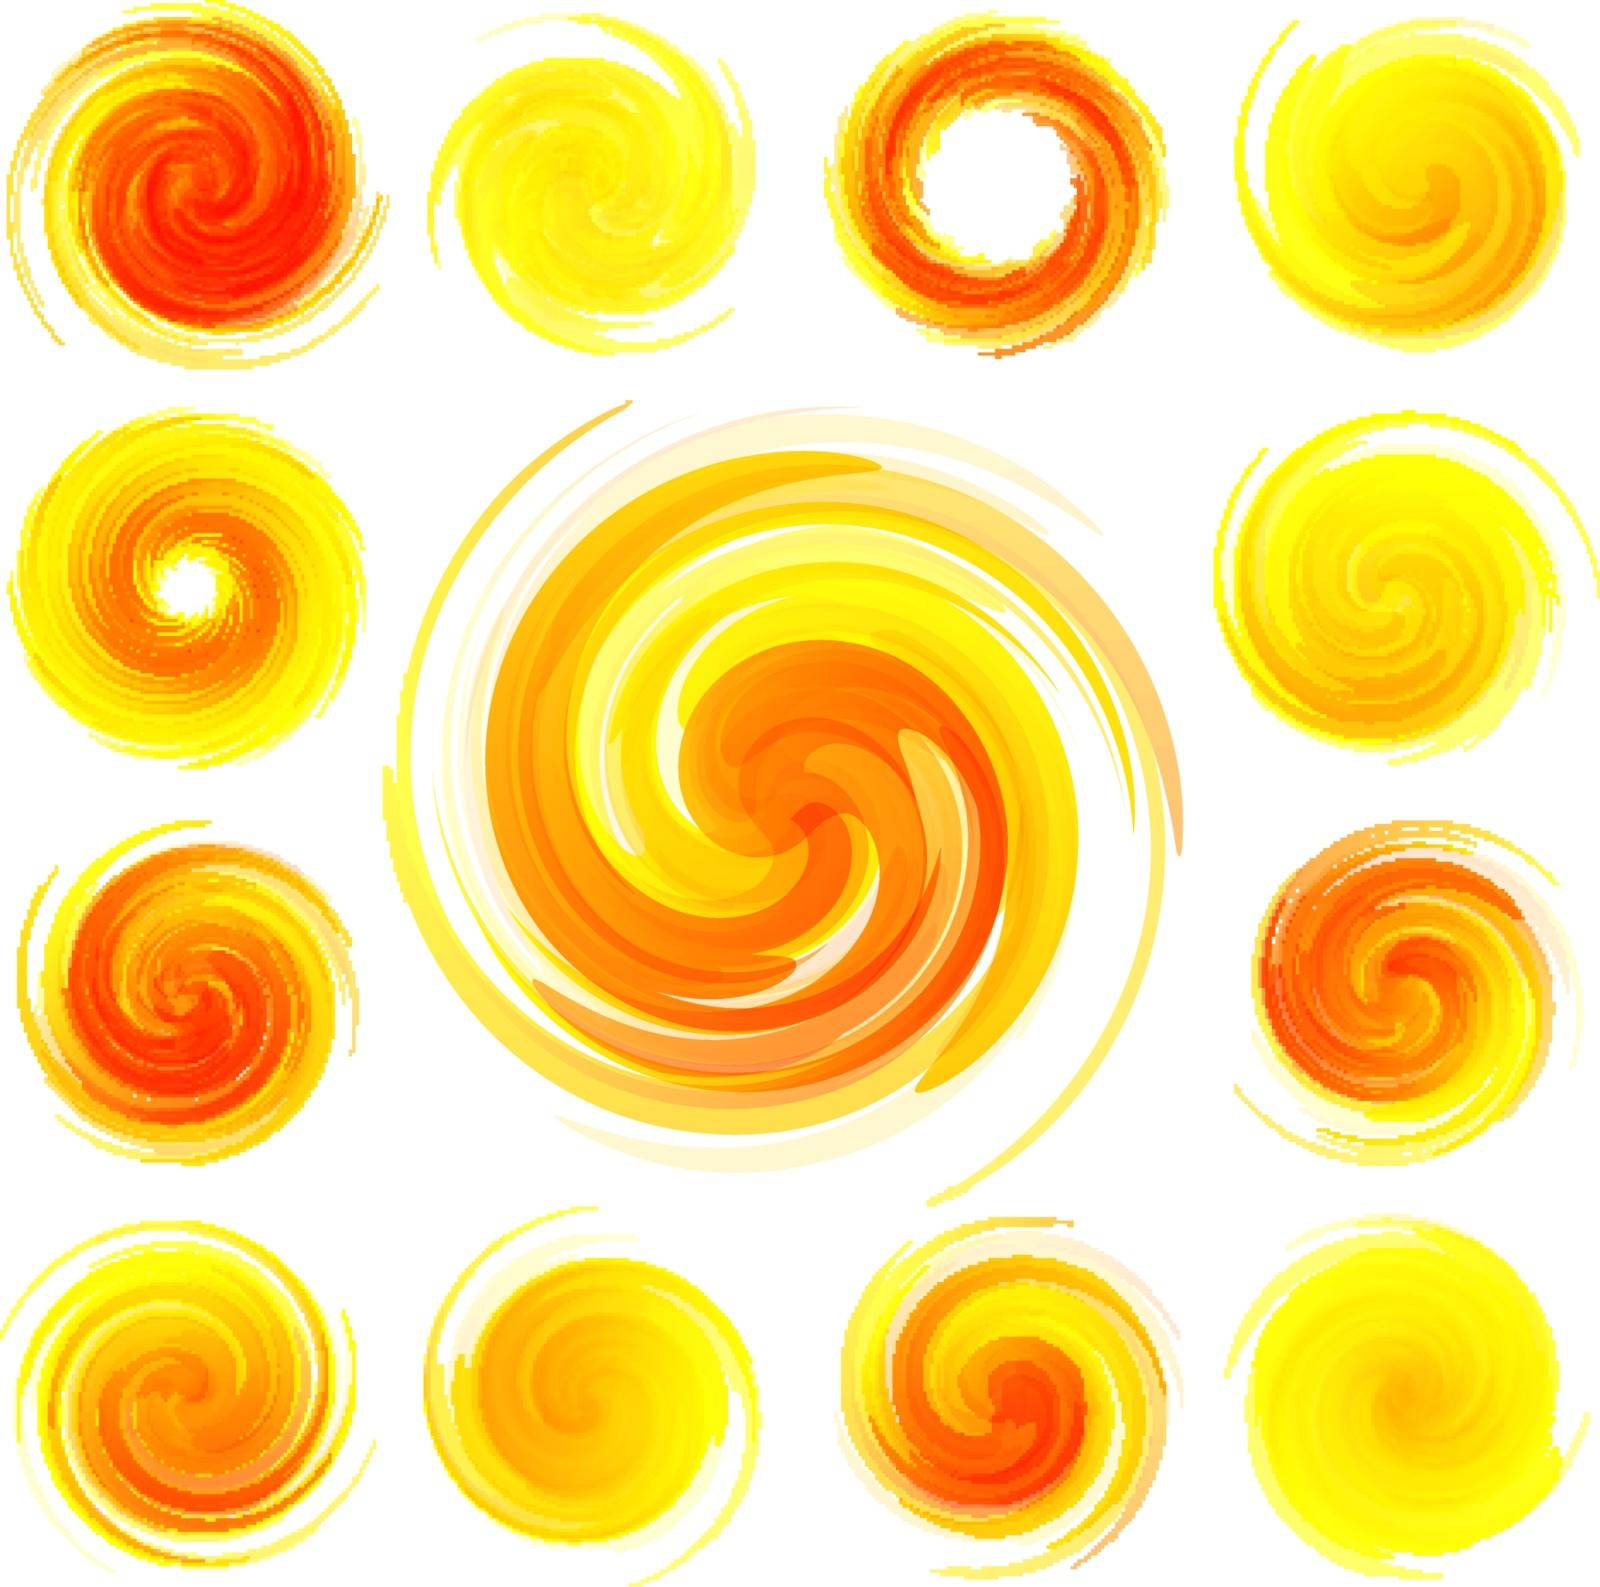 Sunny swirl elements for design. Abstract illustration.